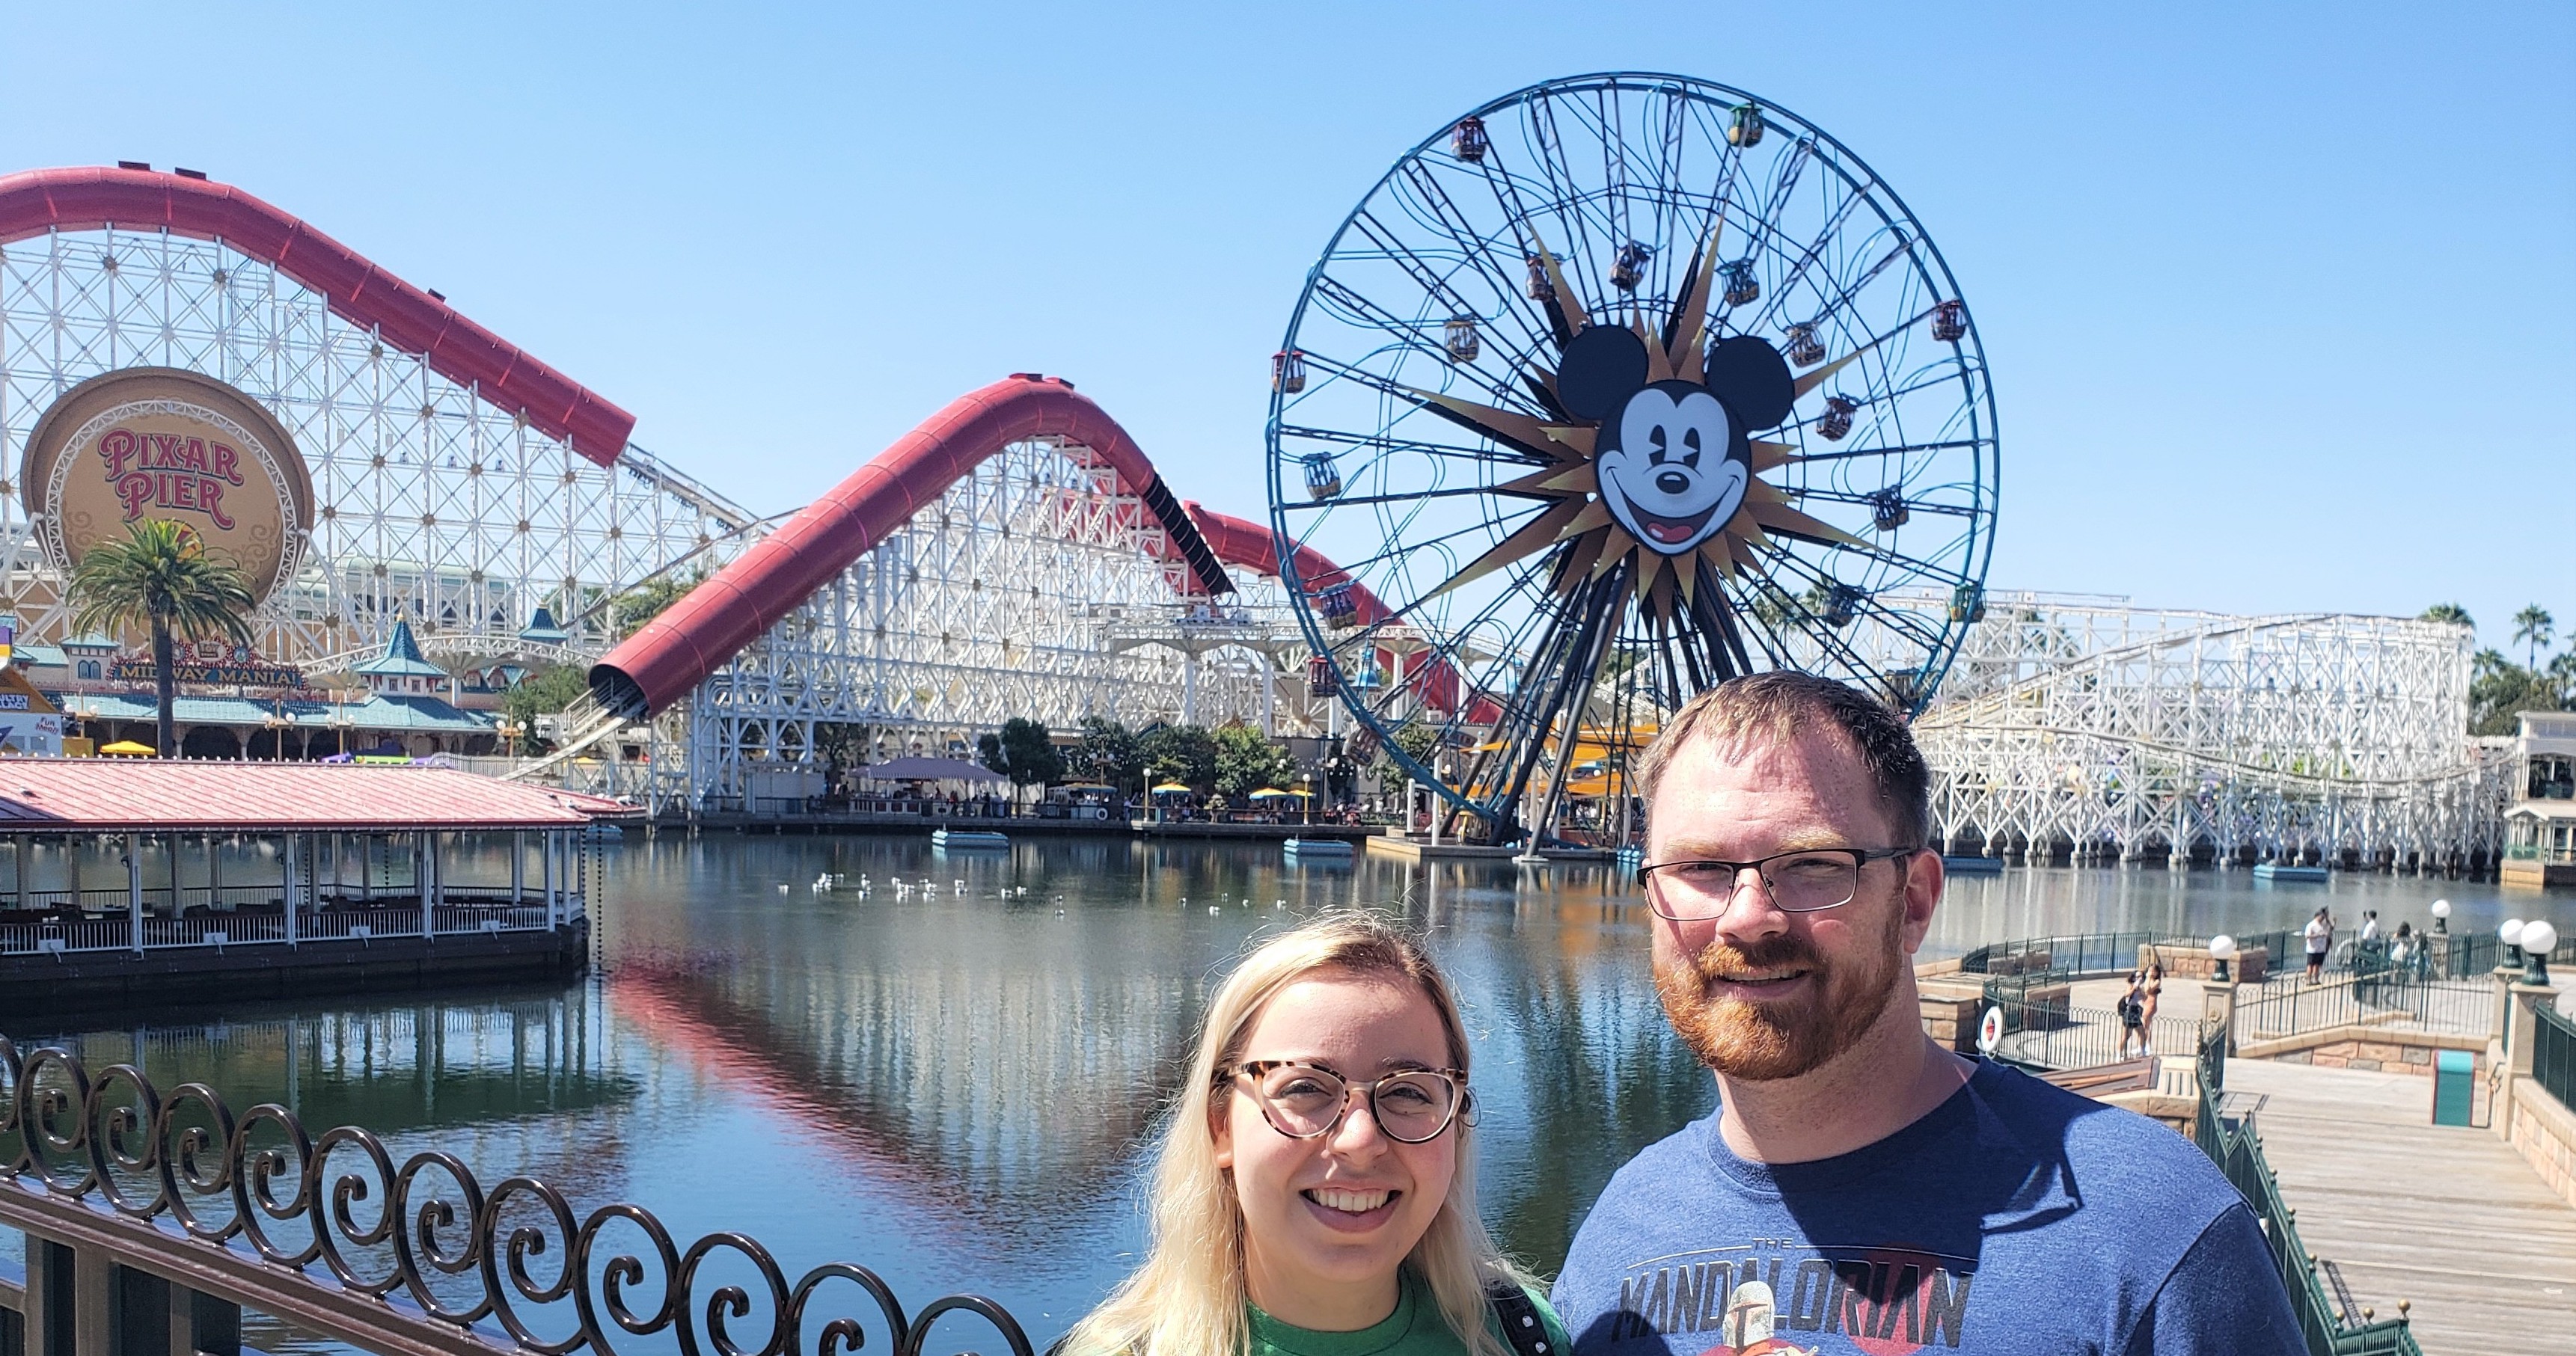 Addie and another man pose in front of a roller coaster and Ferris wheel at Disney California Adventure Park.